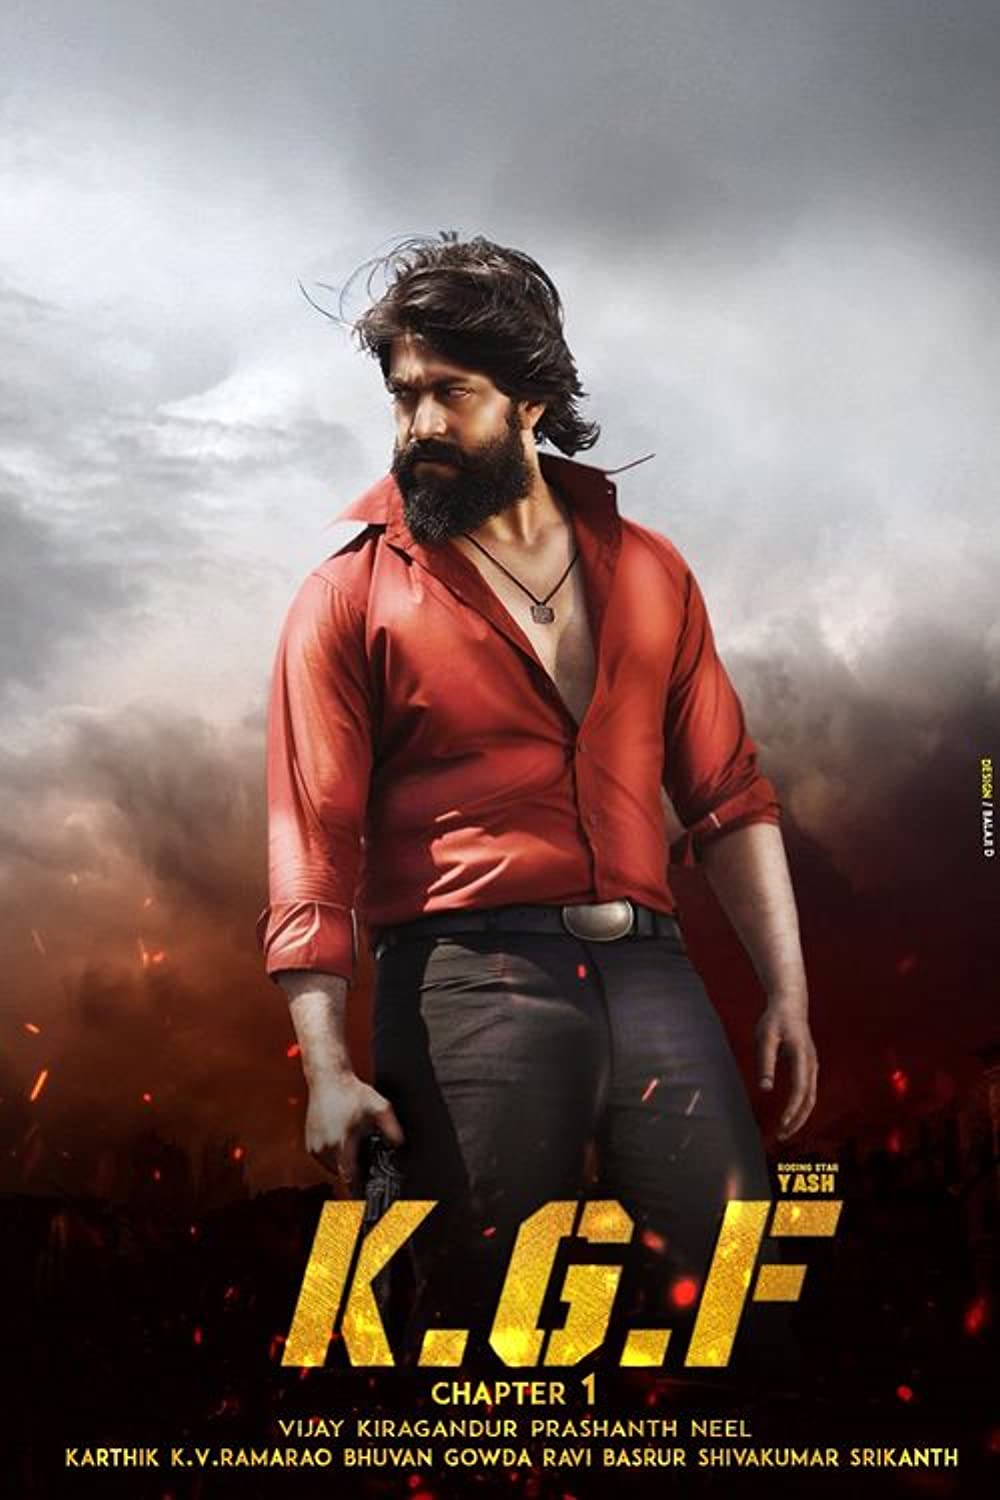 kgf movie review in english